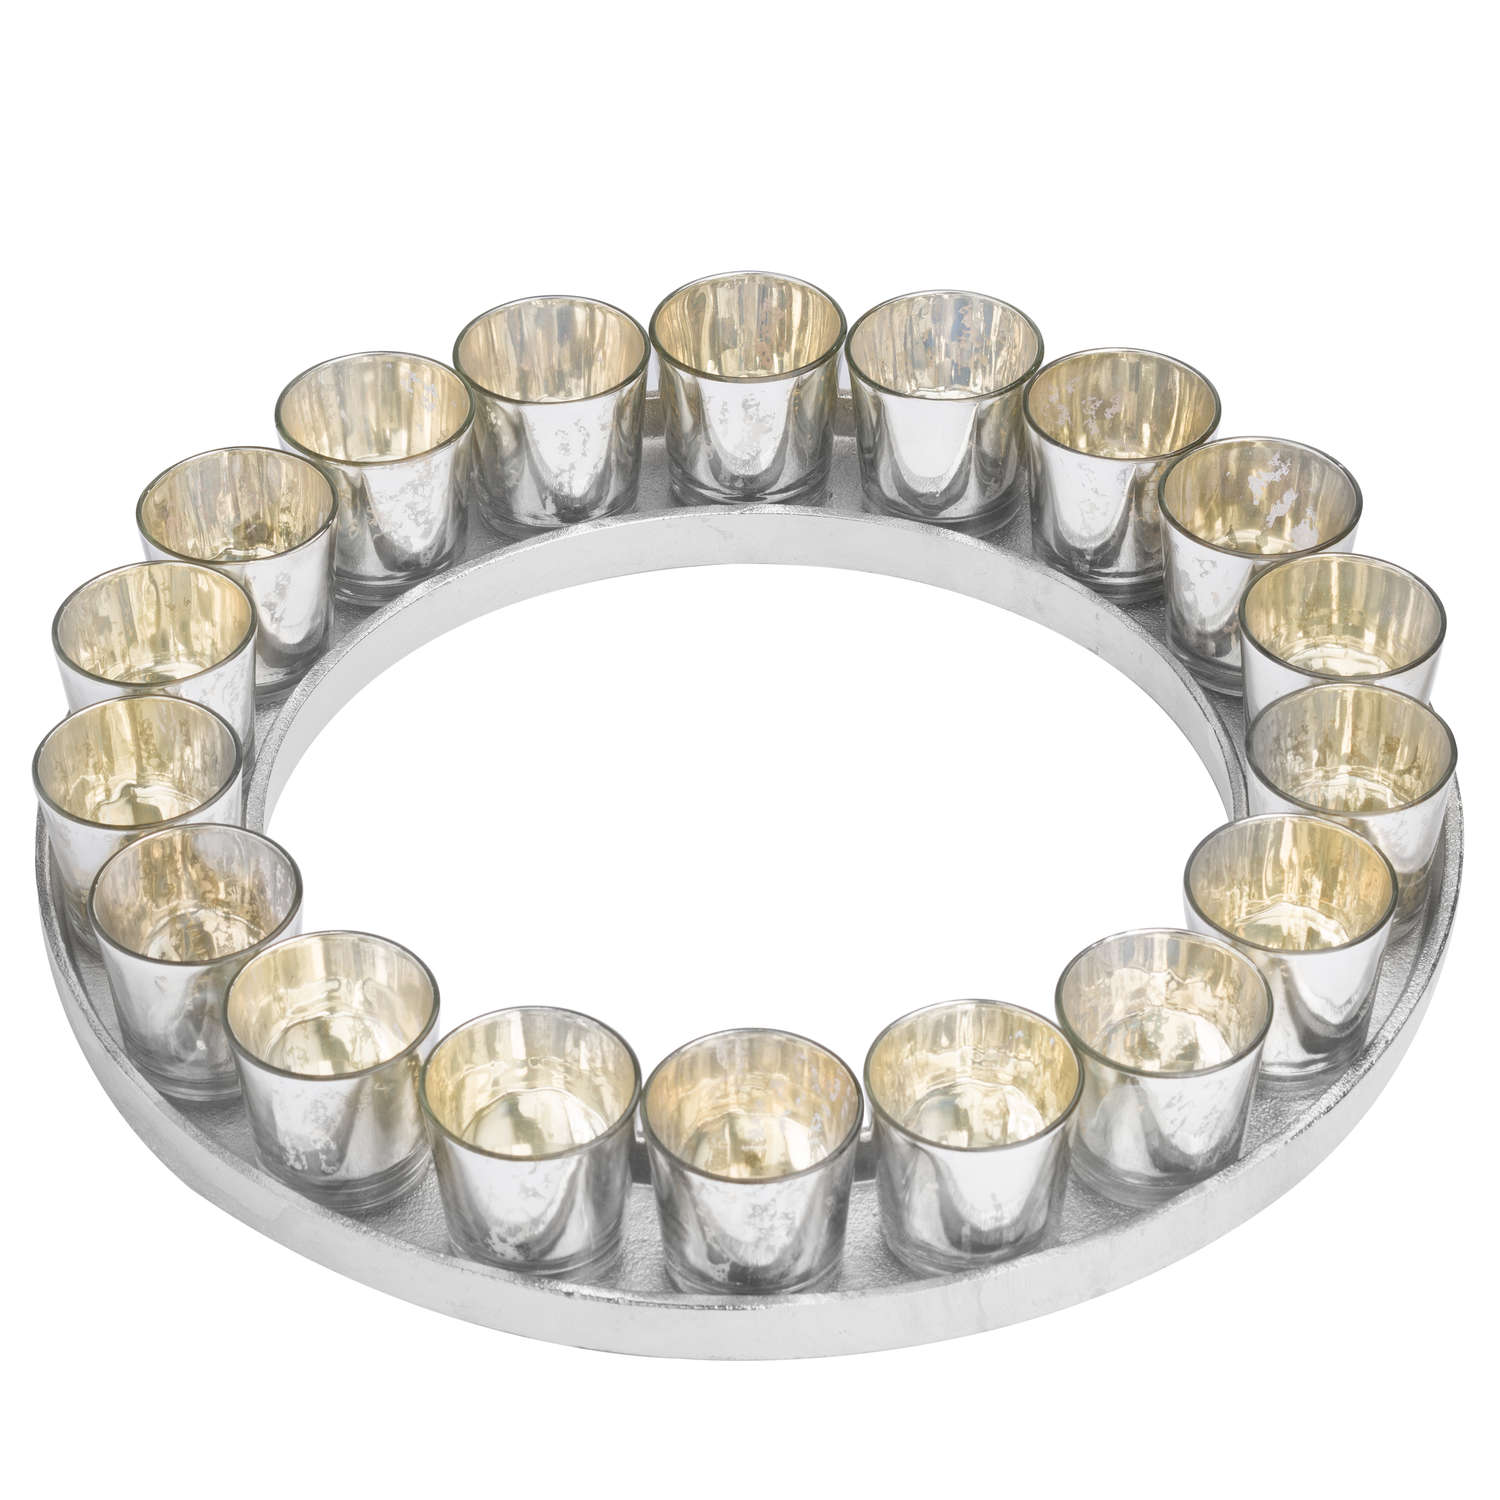 Large Circular Cast Aluminium Tray With Silver Glass Votives - Image 1